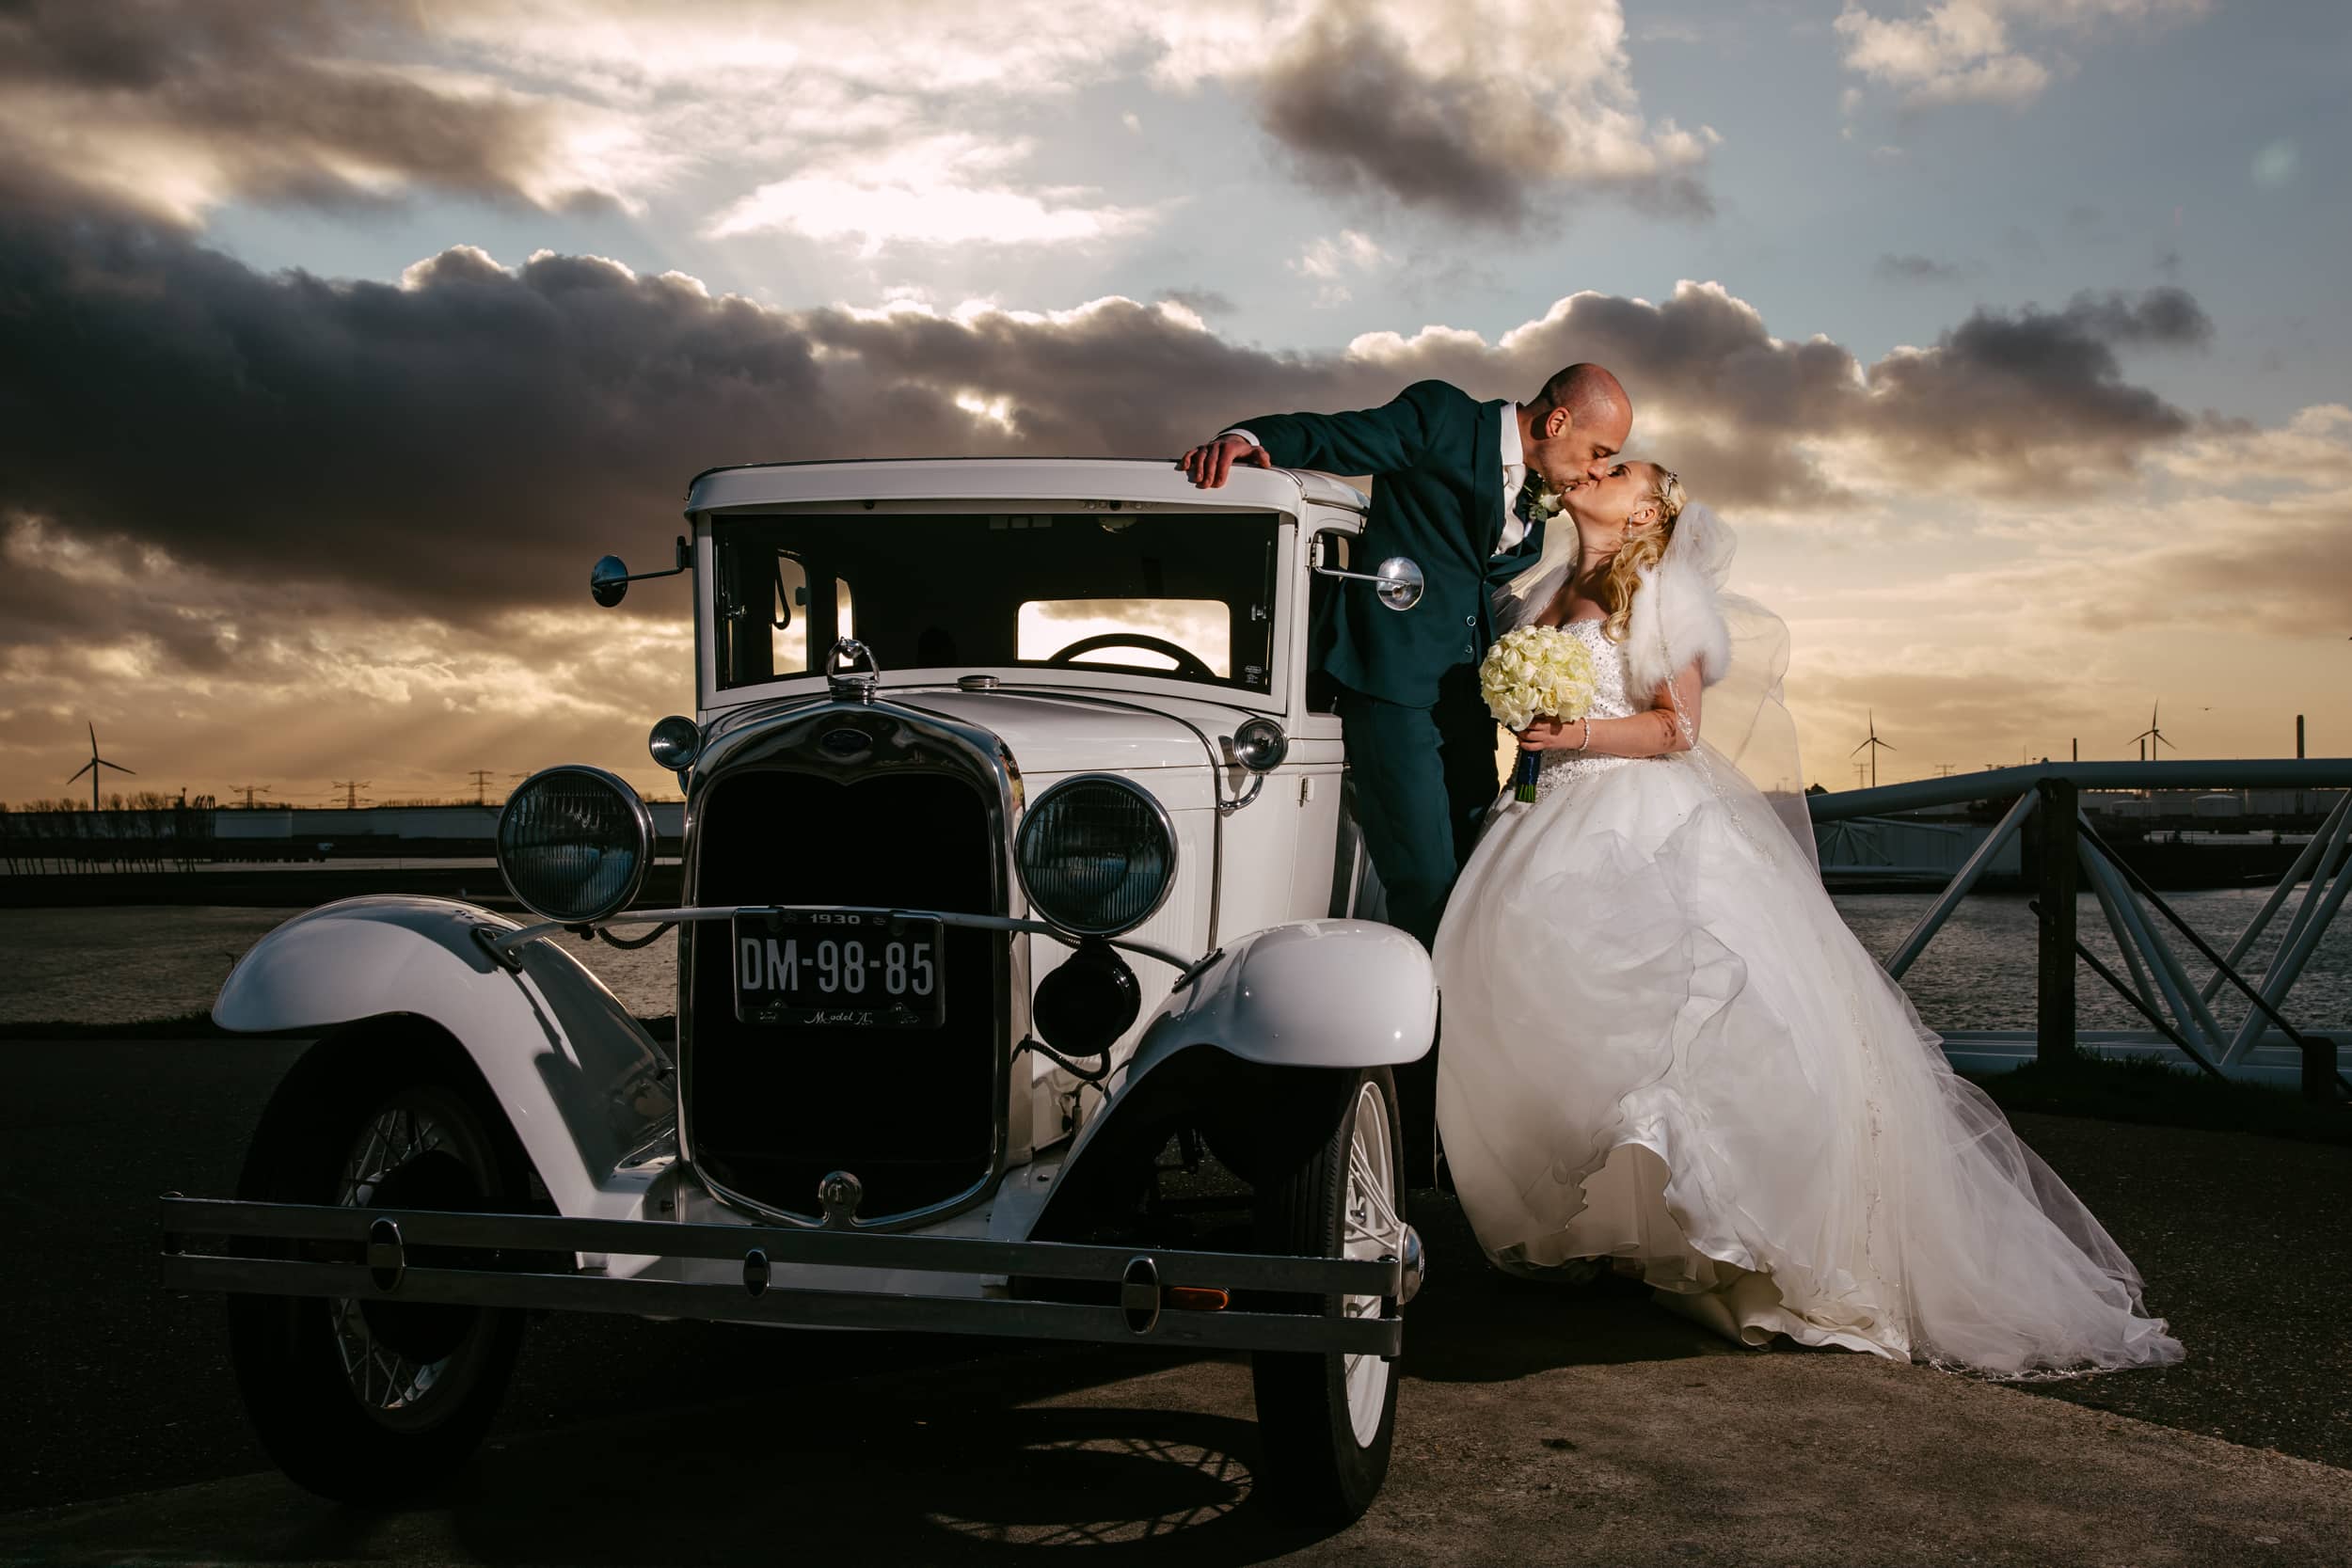 A bride and groom pose in contact with a vintage car and share a romantic kiss.